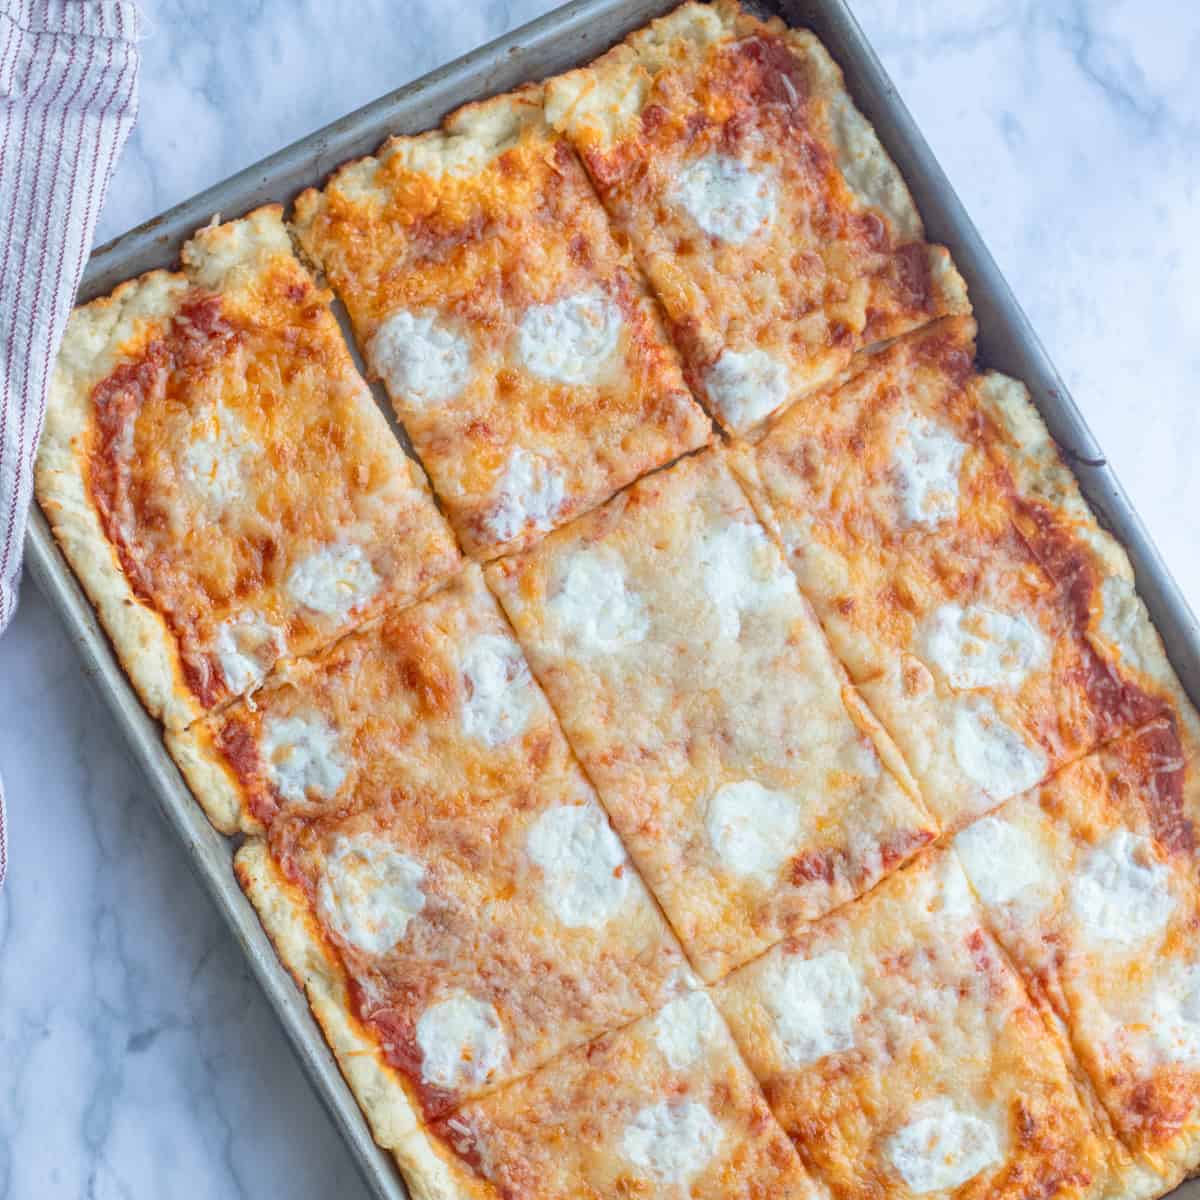 Cafeteria-style school pizza cut into rectangles in a sheet pan.